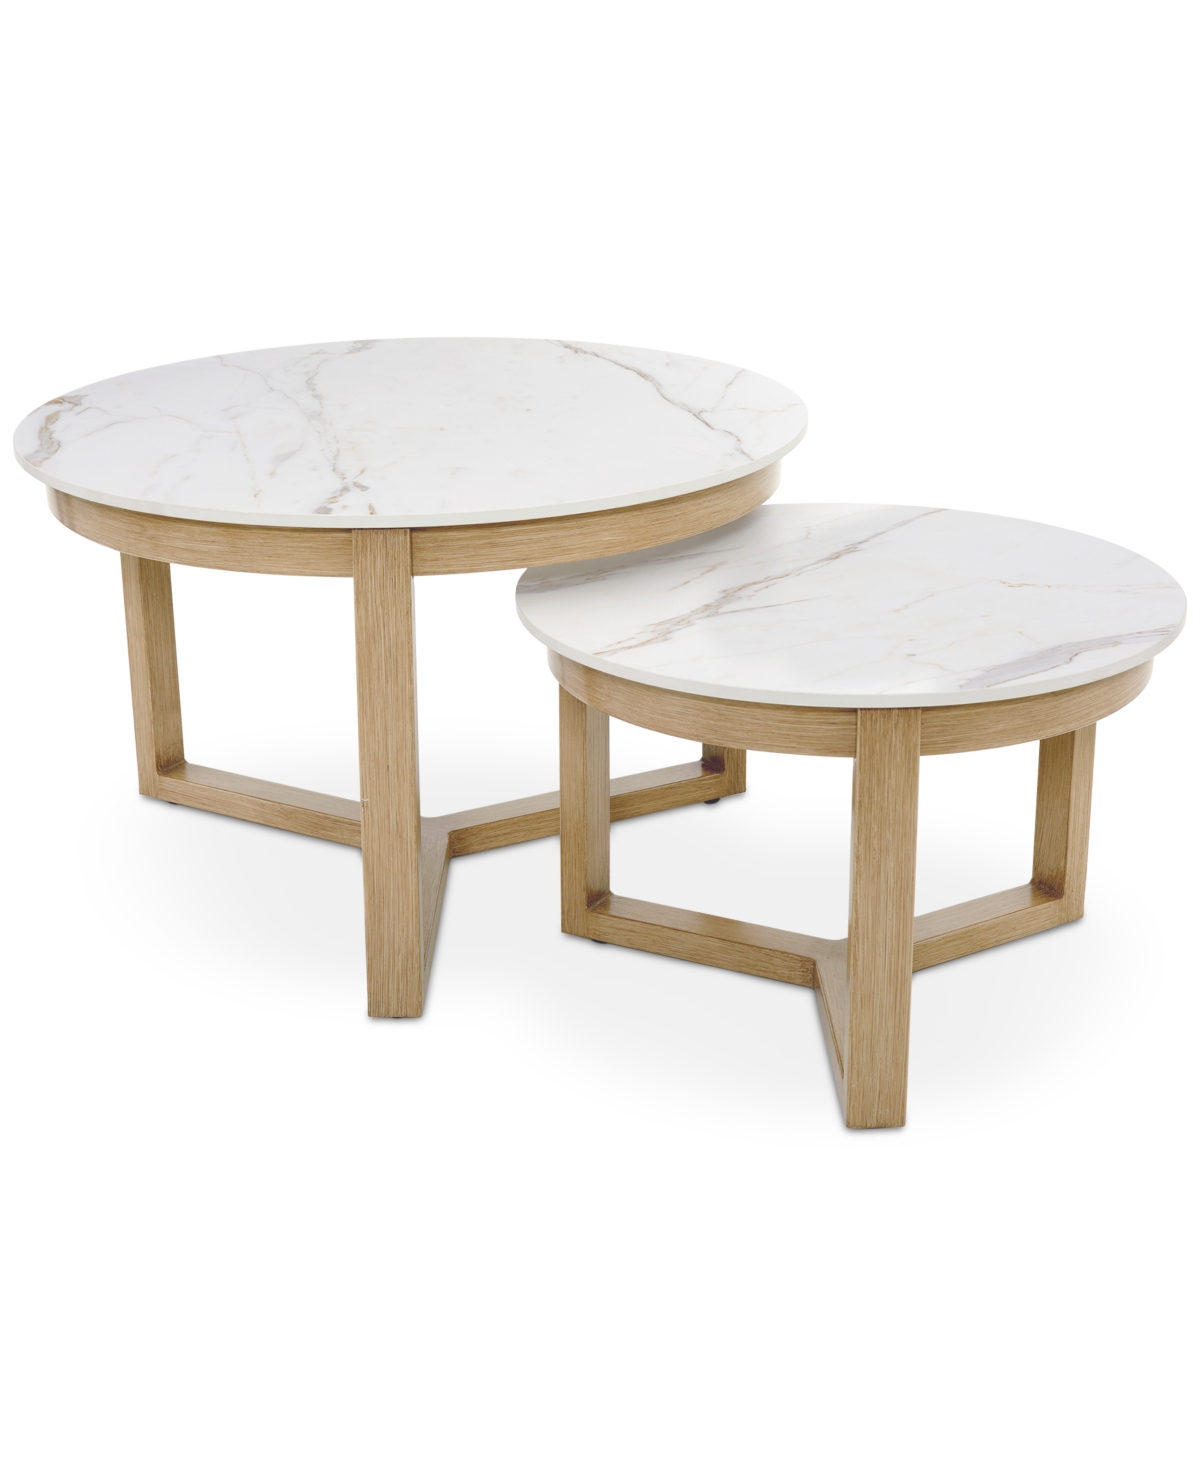 Agio Reid Outdoor Nesting Porcelain Top Coffee Tables (30" + 23"), Created For Macy's